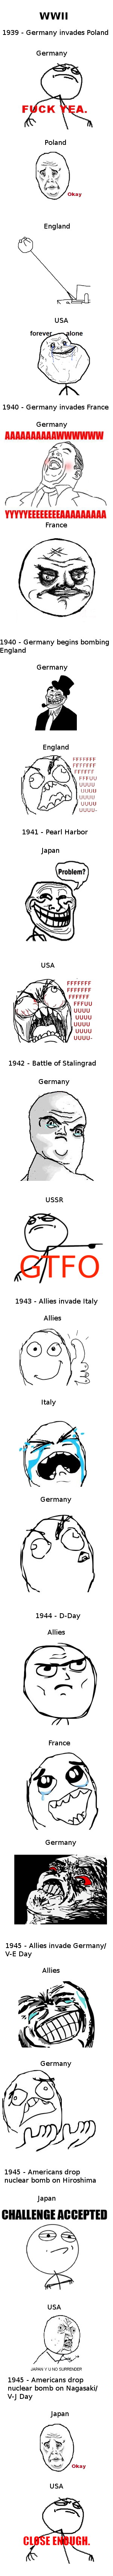 a-short-illustrated-summary-of-wwii.jpg